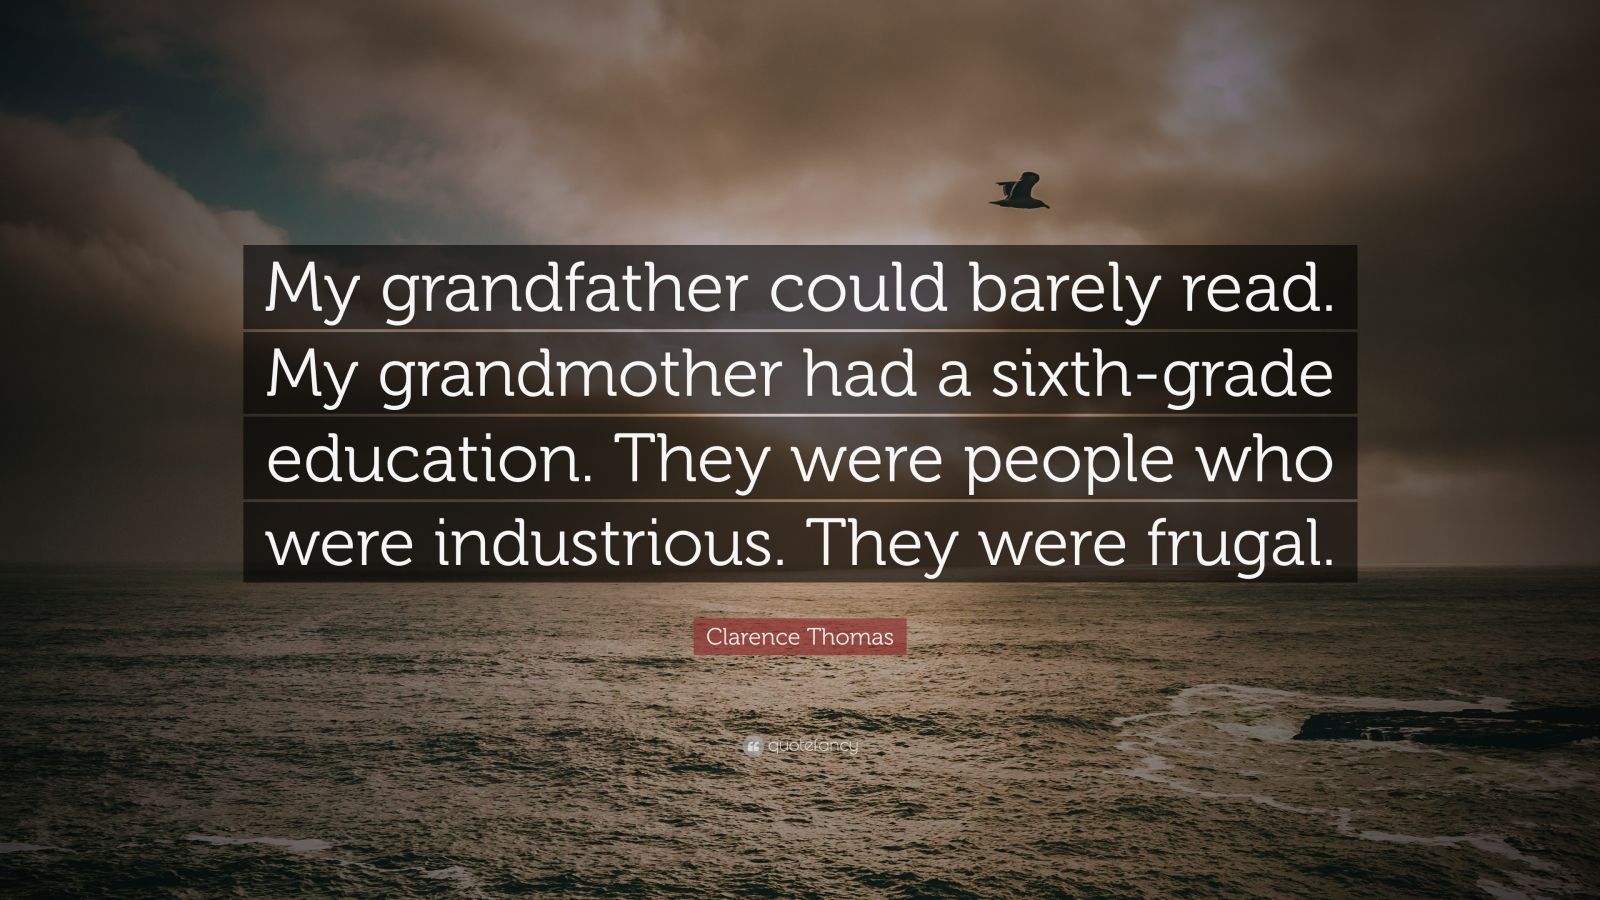 Clarence Thomas Quote: “My grandfather could barely read. My ...